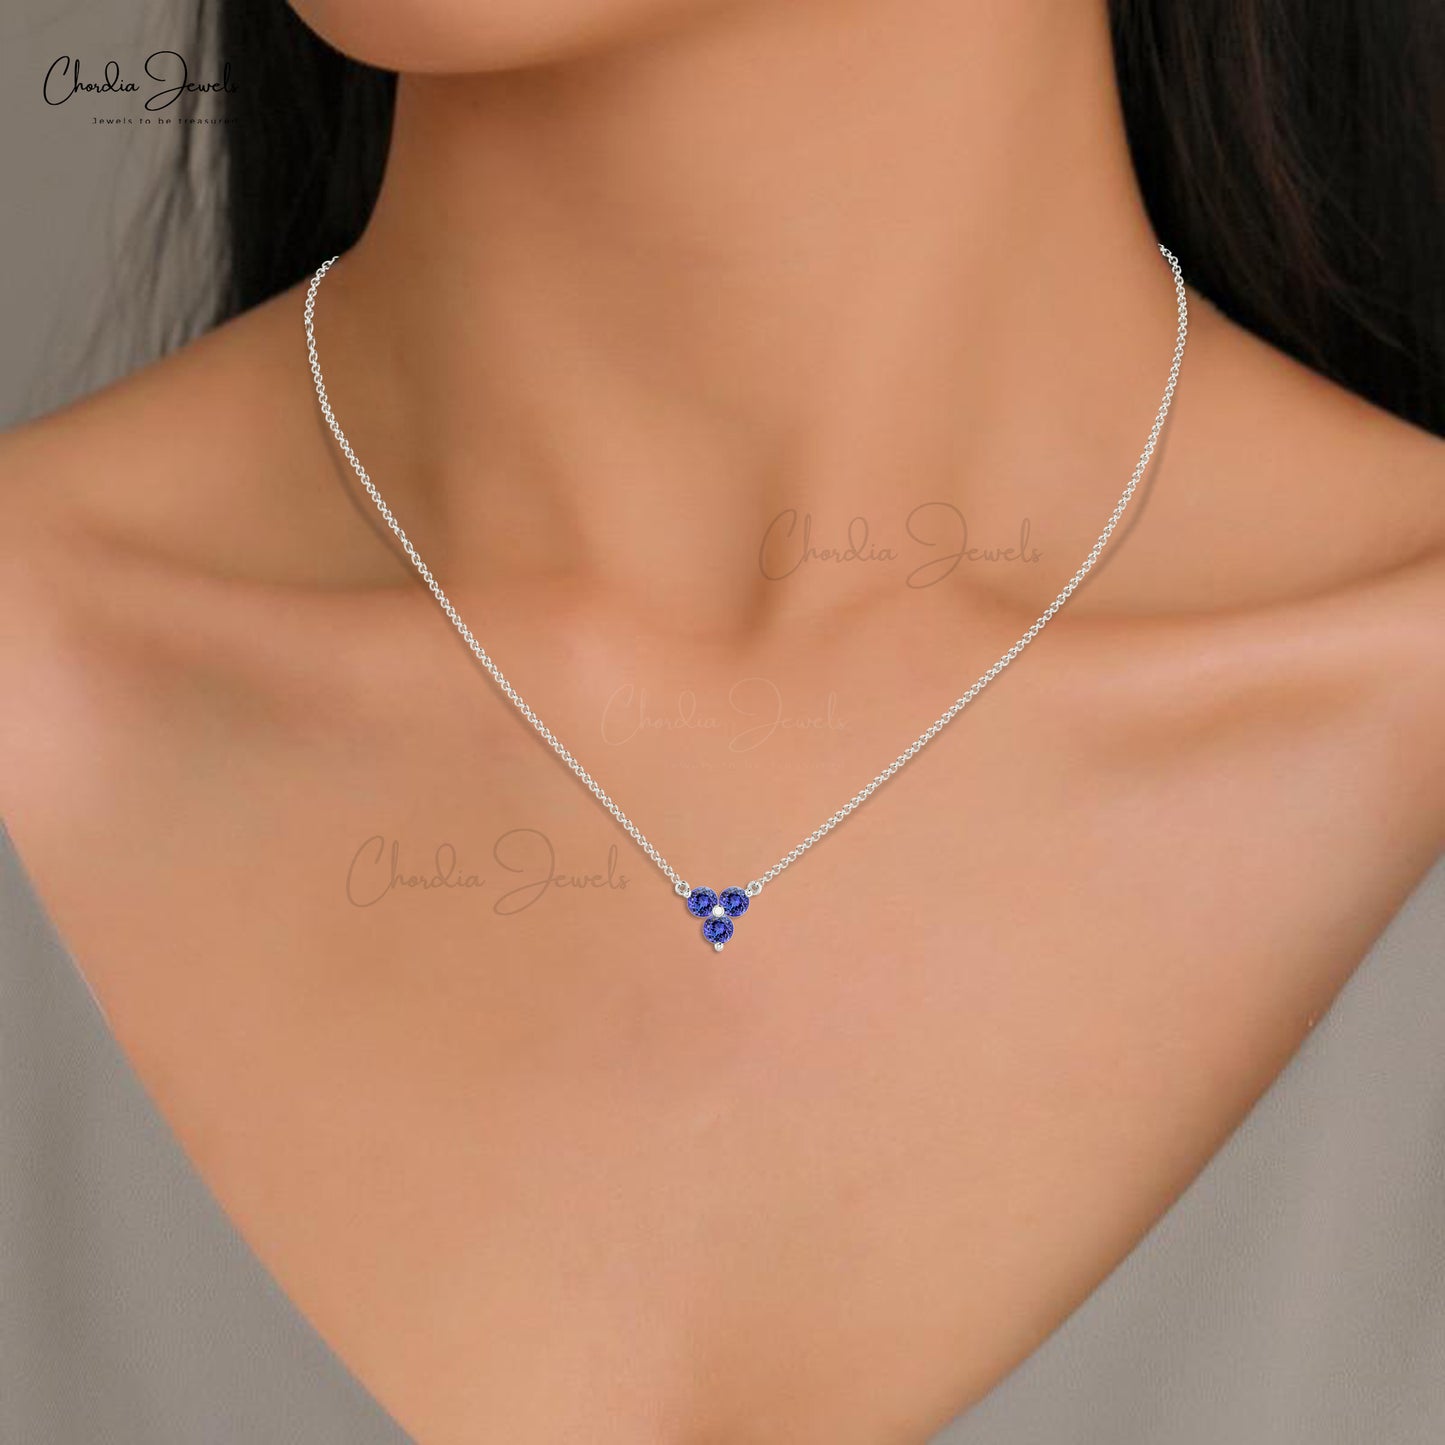 Real 14k Gold 2-Prong Set December Birthstone 3-Stone Necklace 3mm Round Cut Natural Tanzanite Gemstone Hallmarked Jewelry For Her